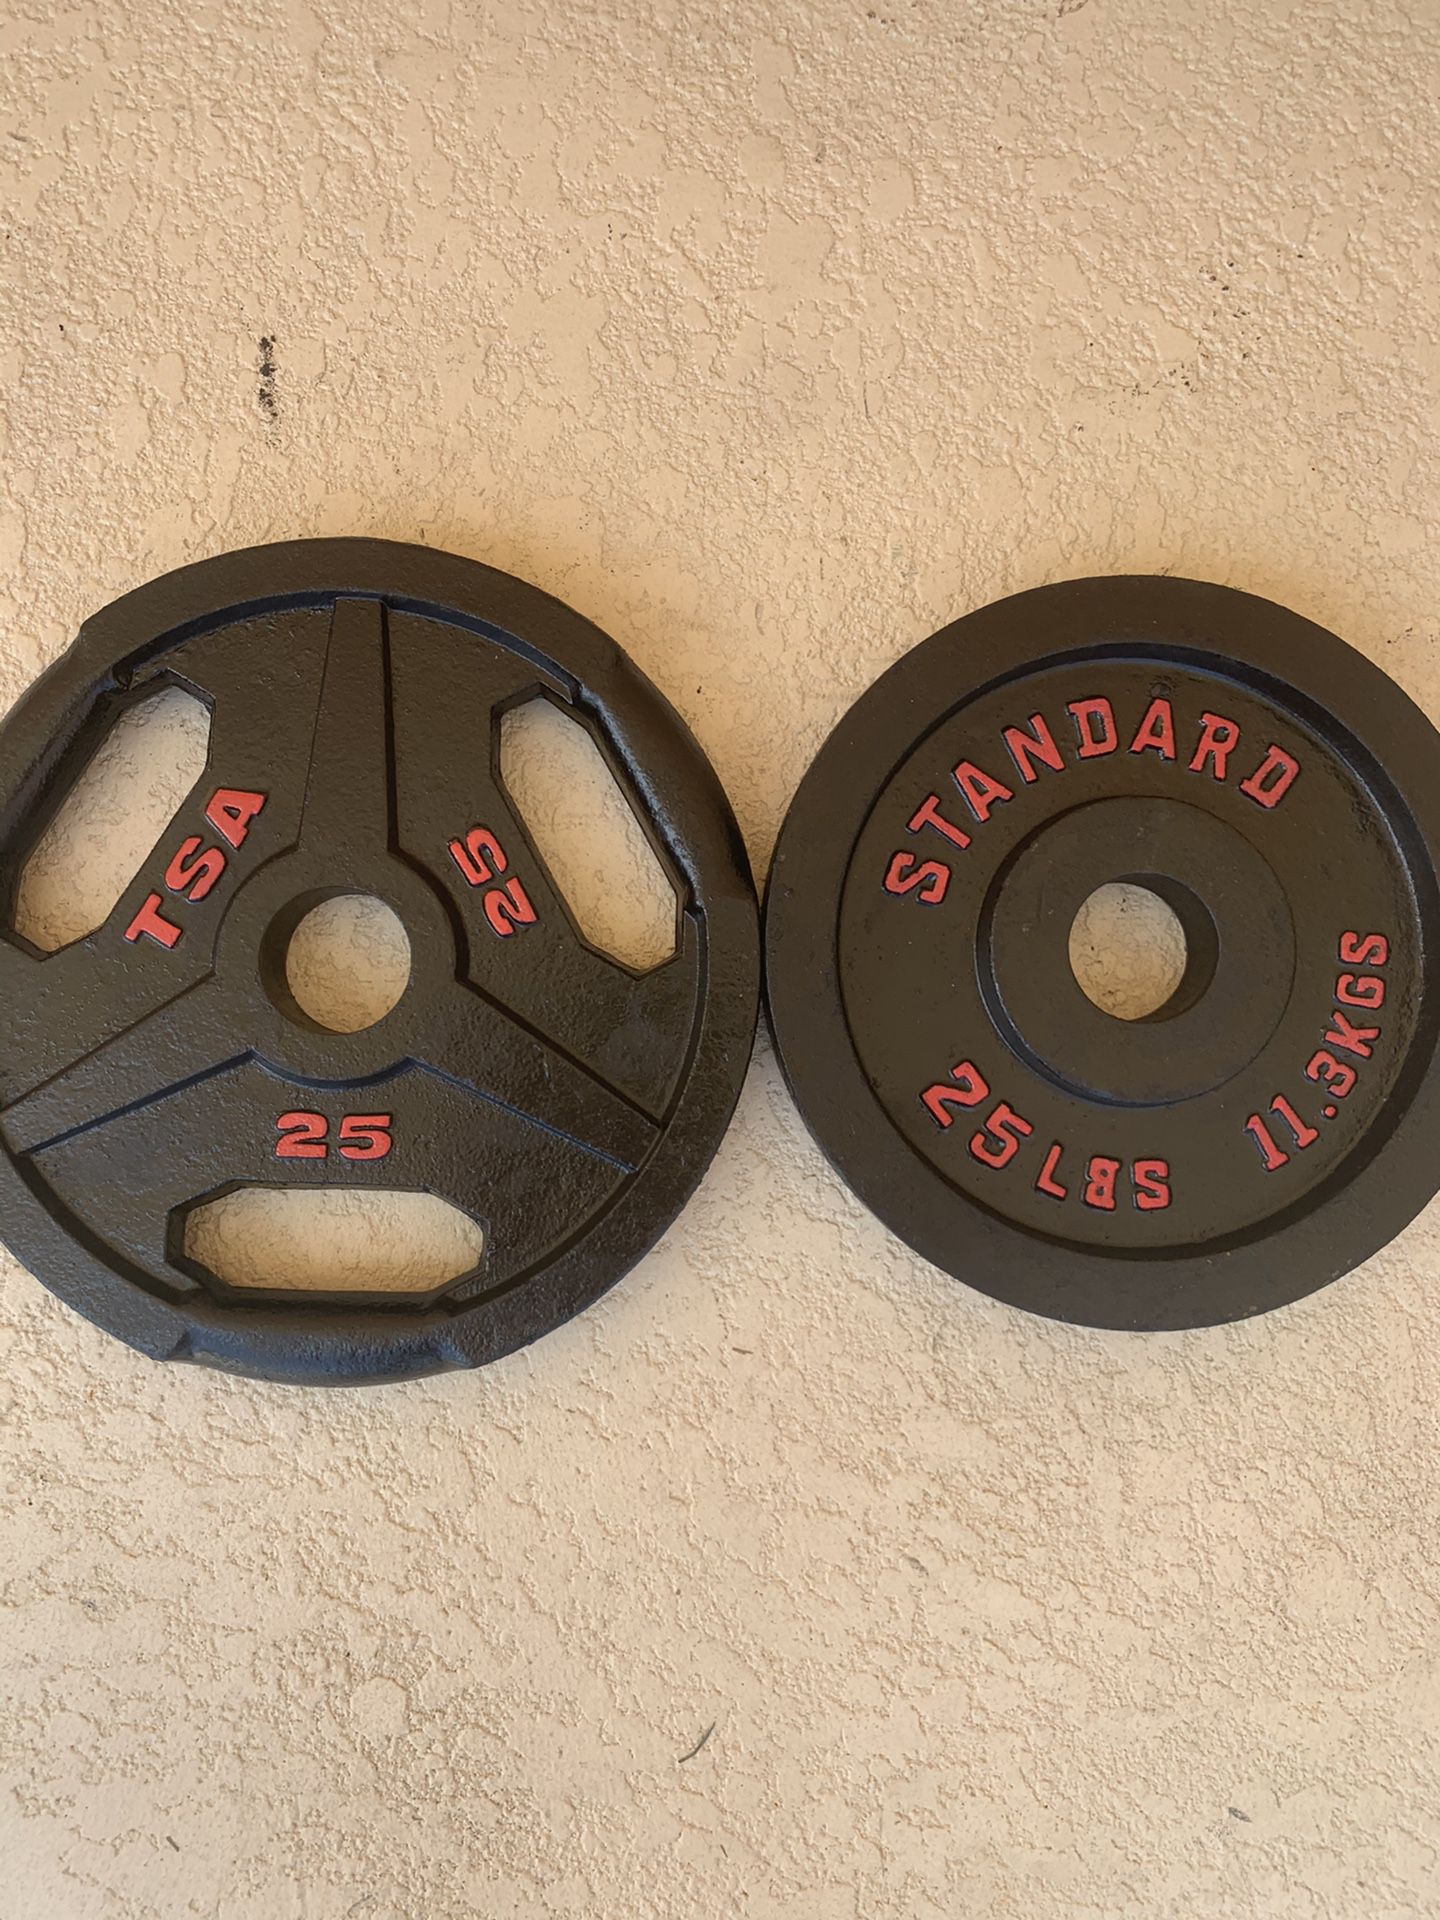 Olympic weights